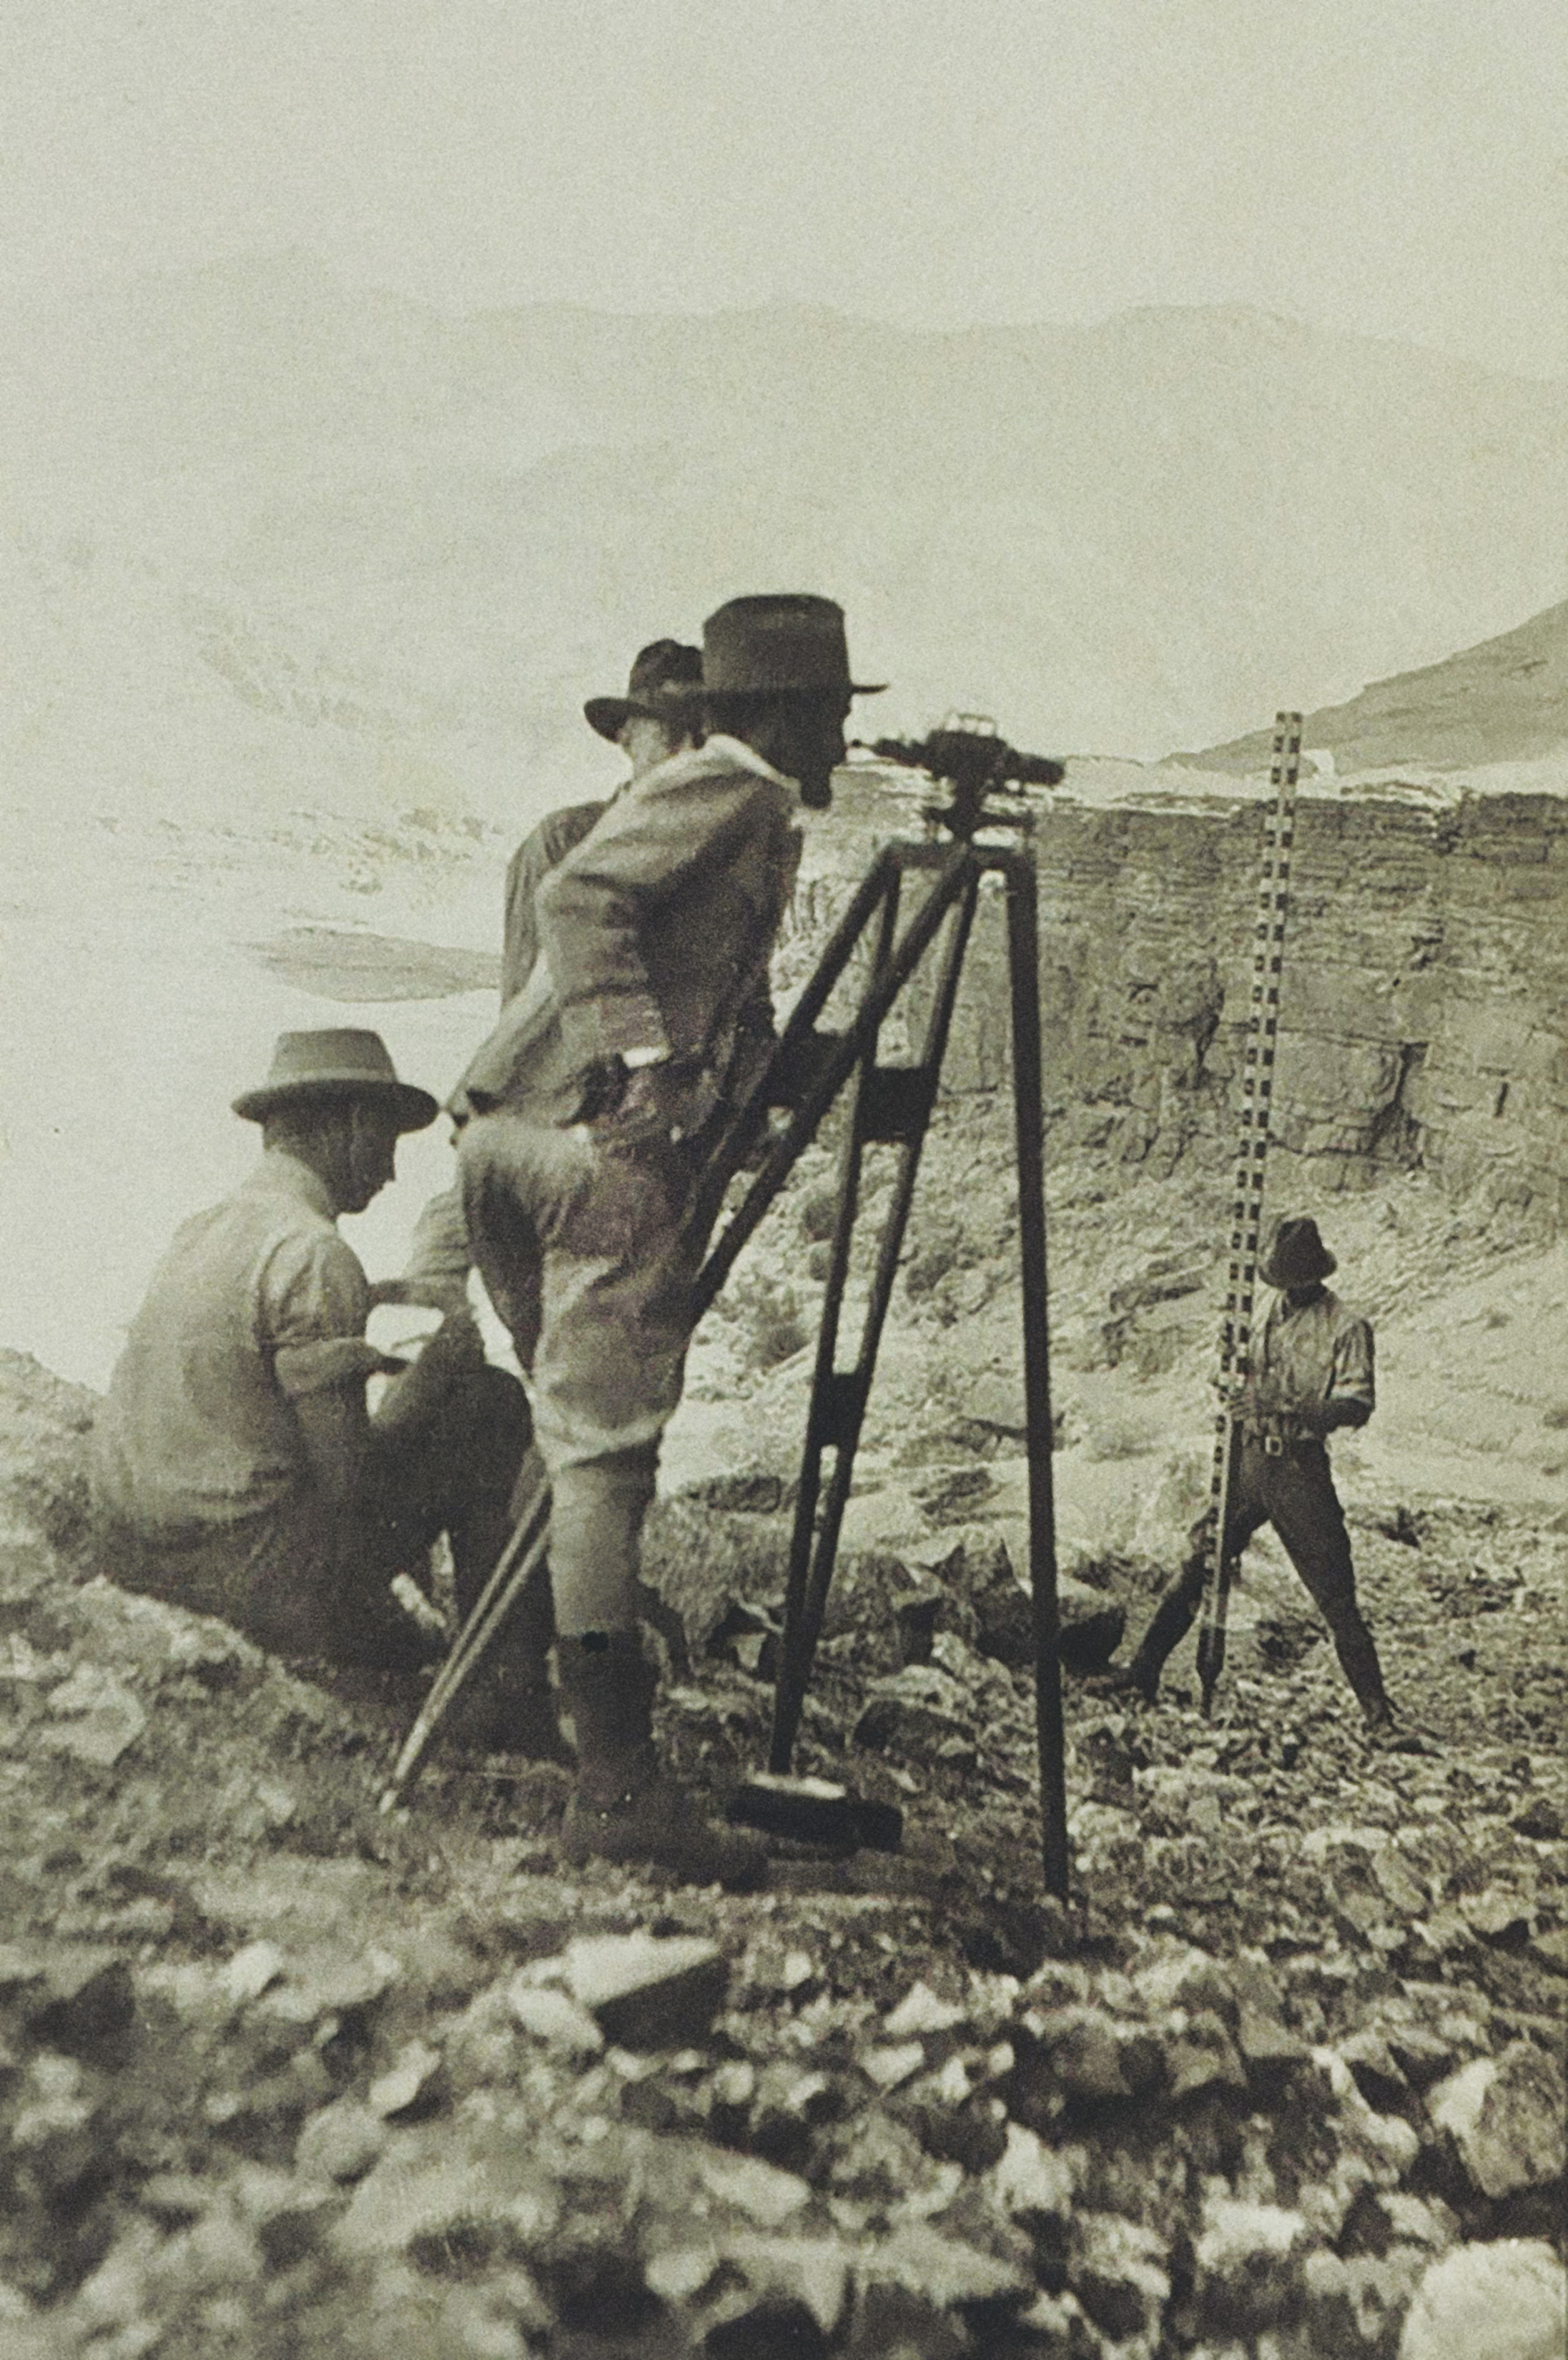 black and white image of surveyors with Fischer level